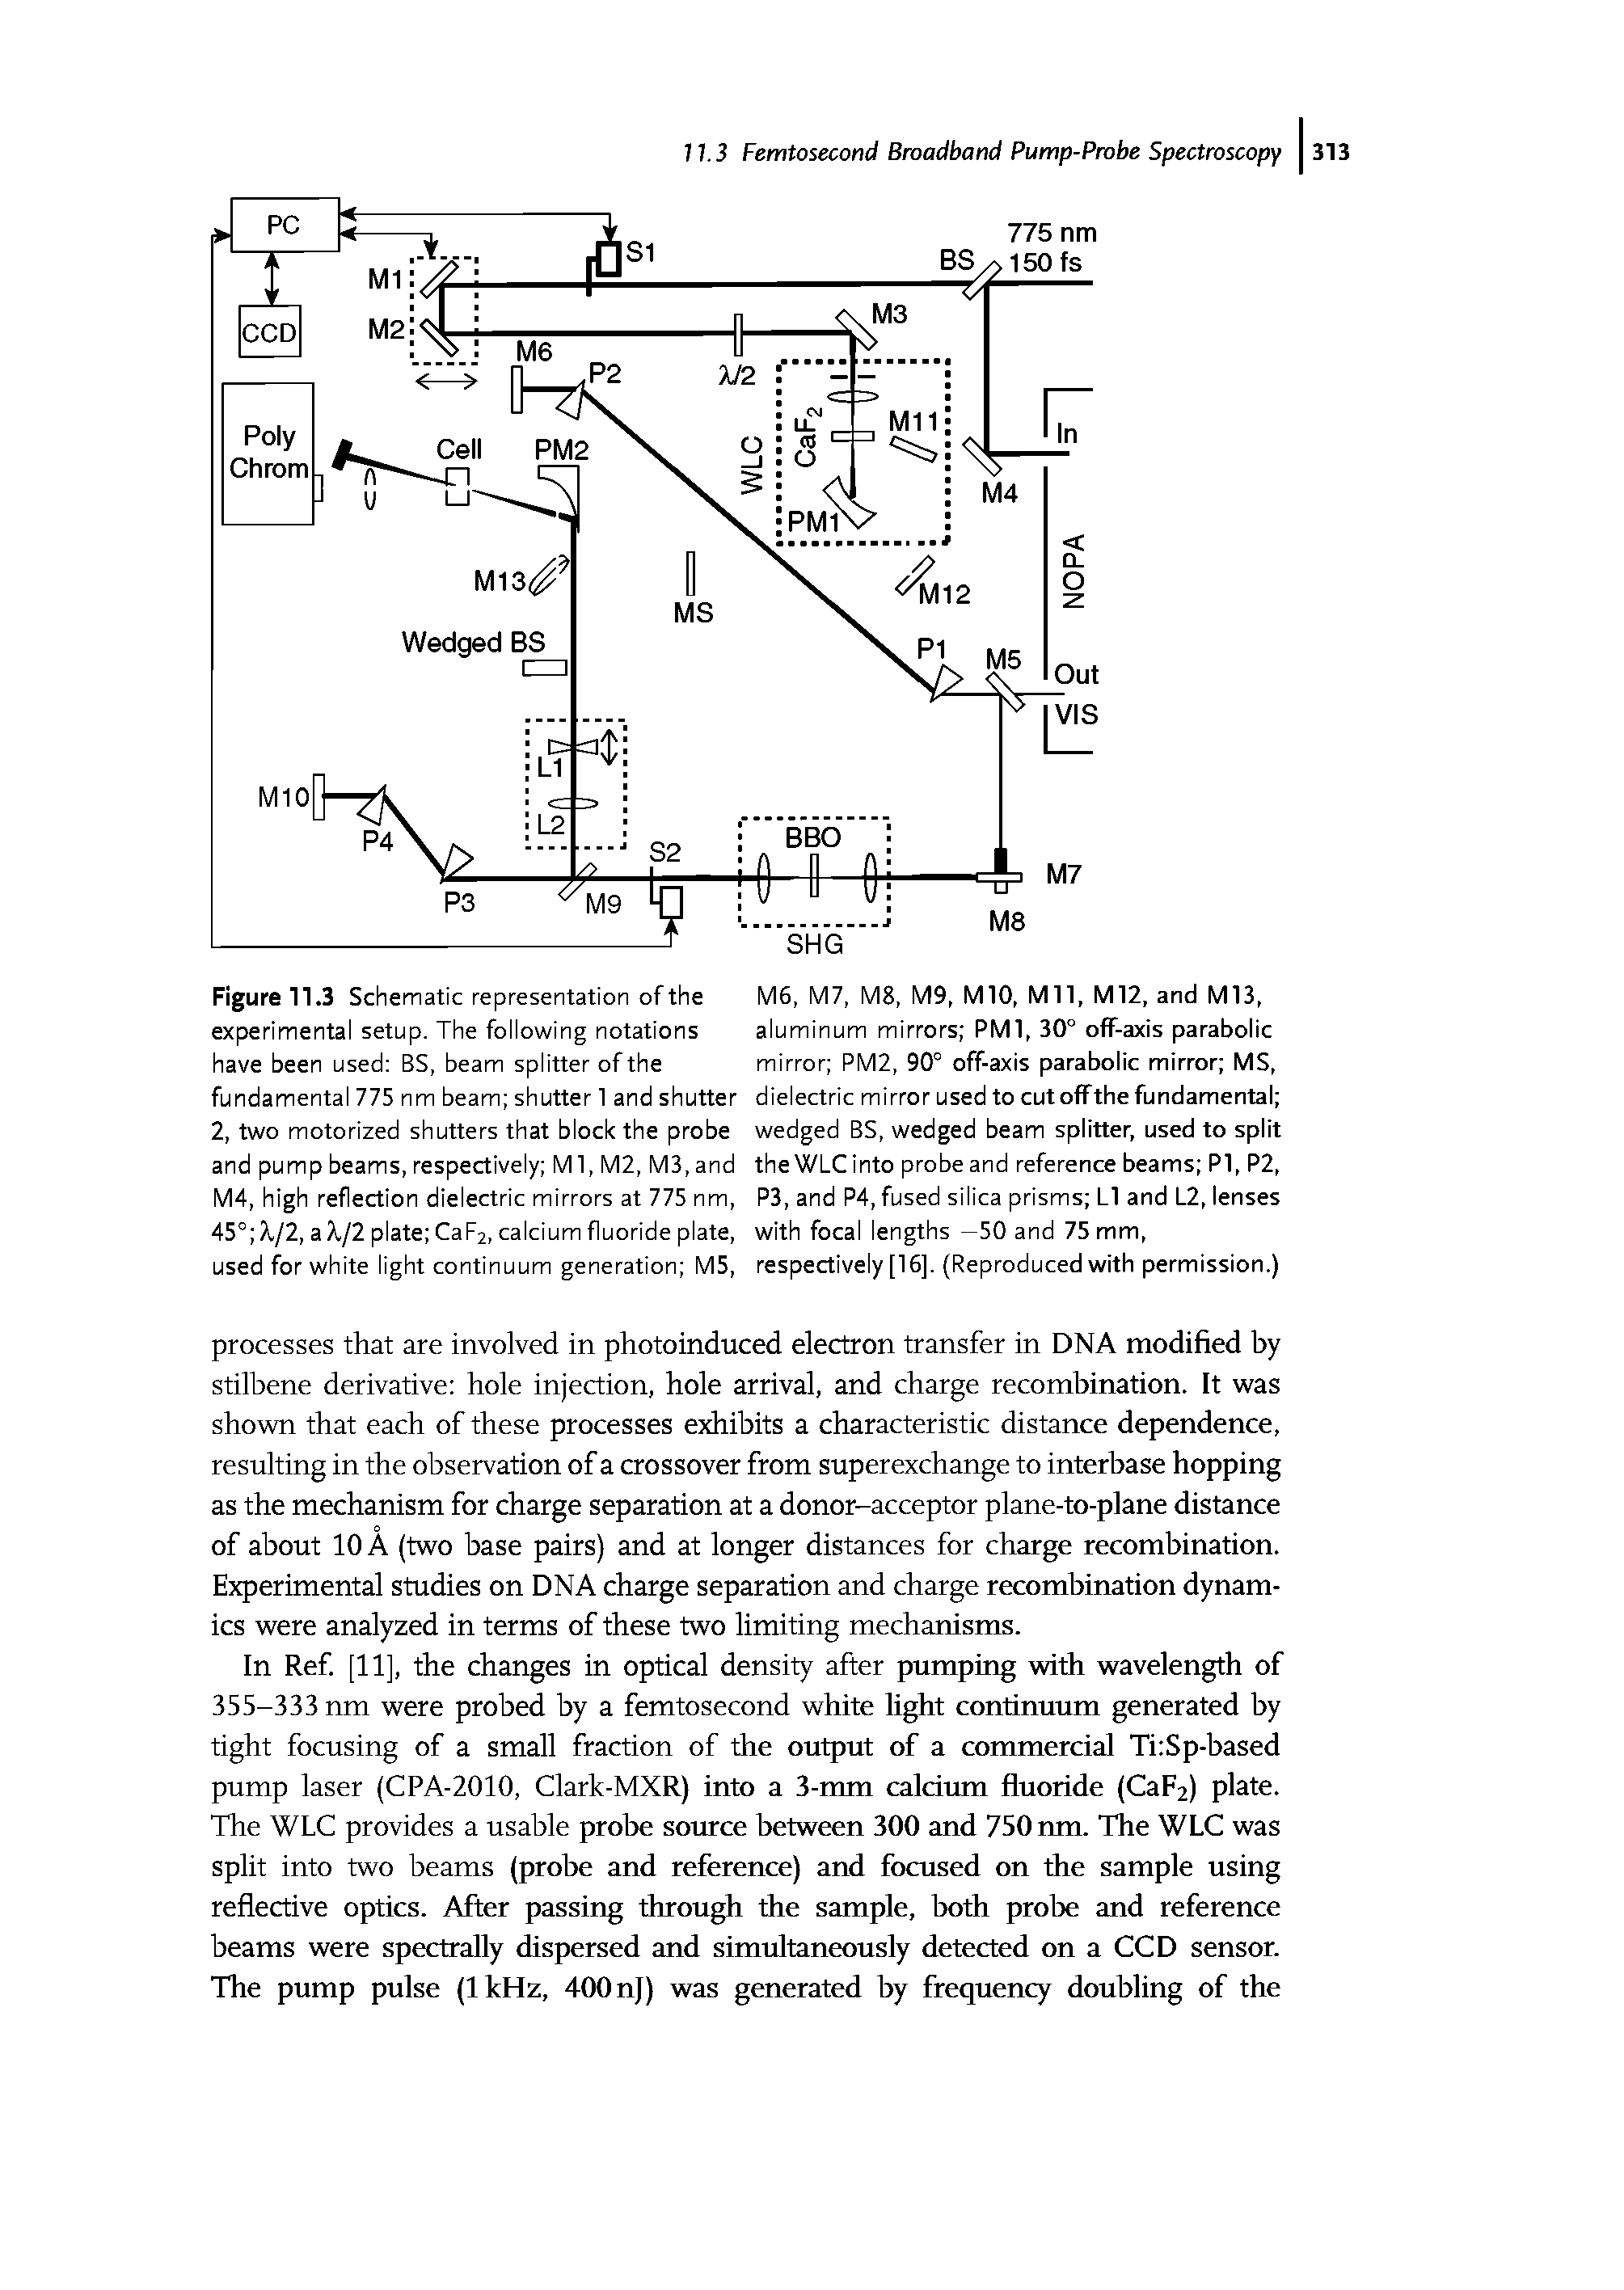 Figure 11.3 Schematic representation of the experimental setup. The following notations have been used BS, beam splitter of the fundamental 775 nm beam shutter 1 and shutter 2, two motorized shutters that block the probe and pump beams, respectively Ml, M2, M3,and M4, high reflection dielectric mirrors at 775 nm, 45° X,/2, aXjl plate Cap2, calcium fluoride plate, used for white light continuum generation M5,...